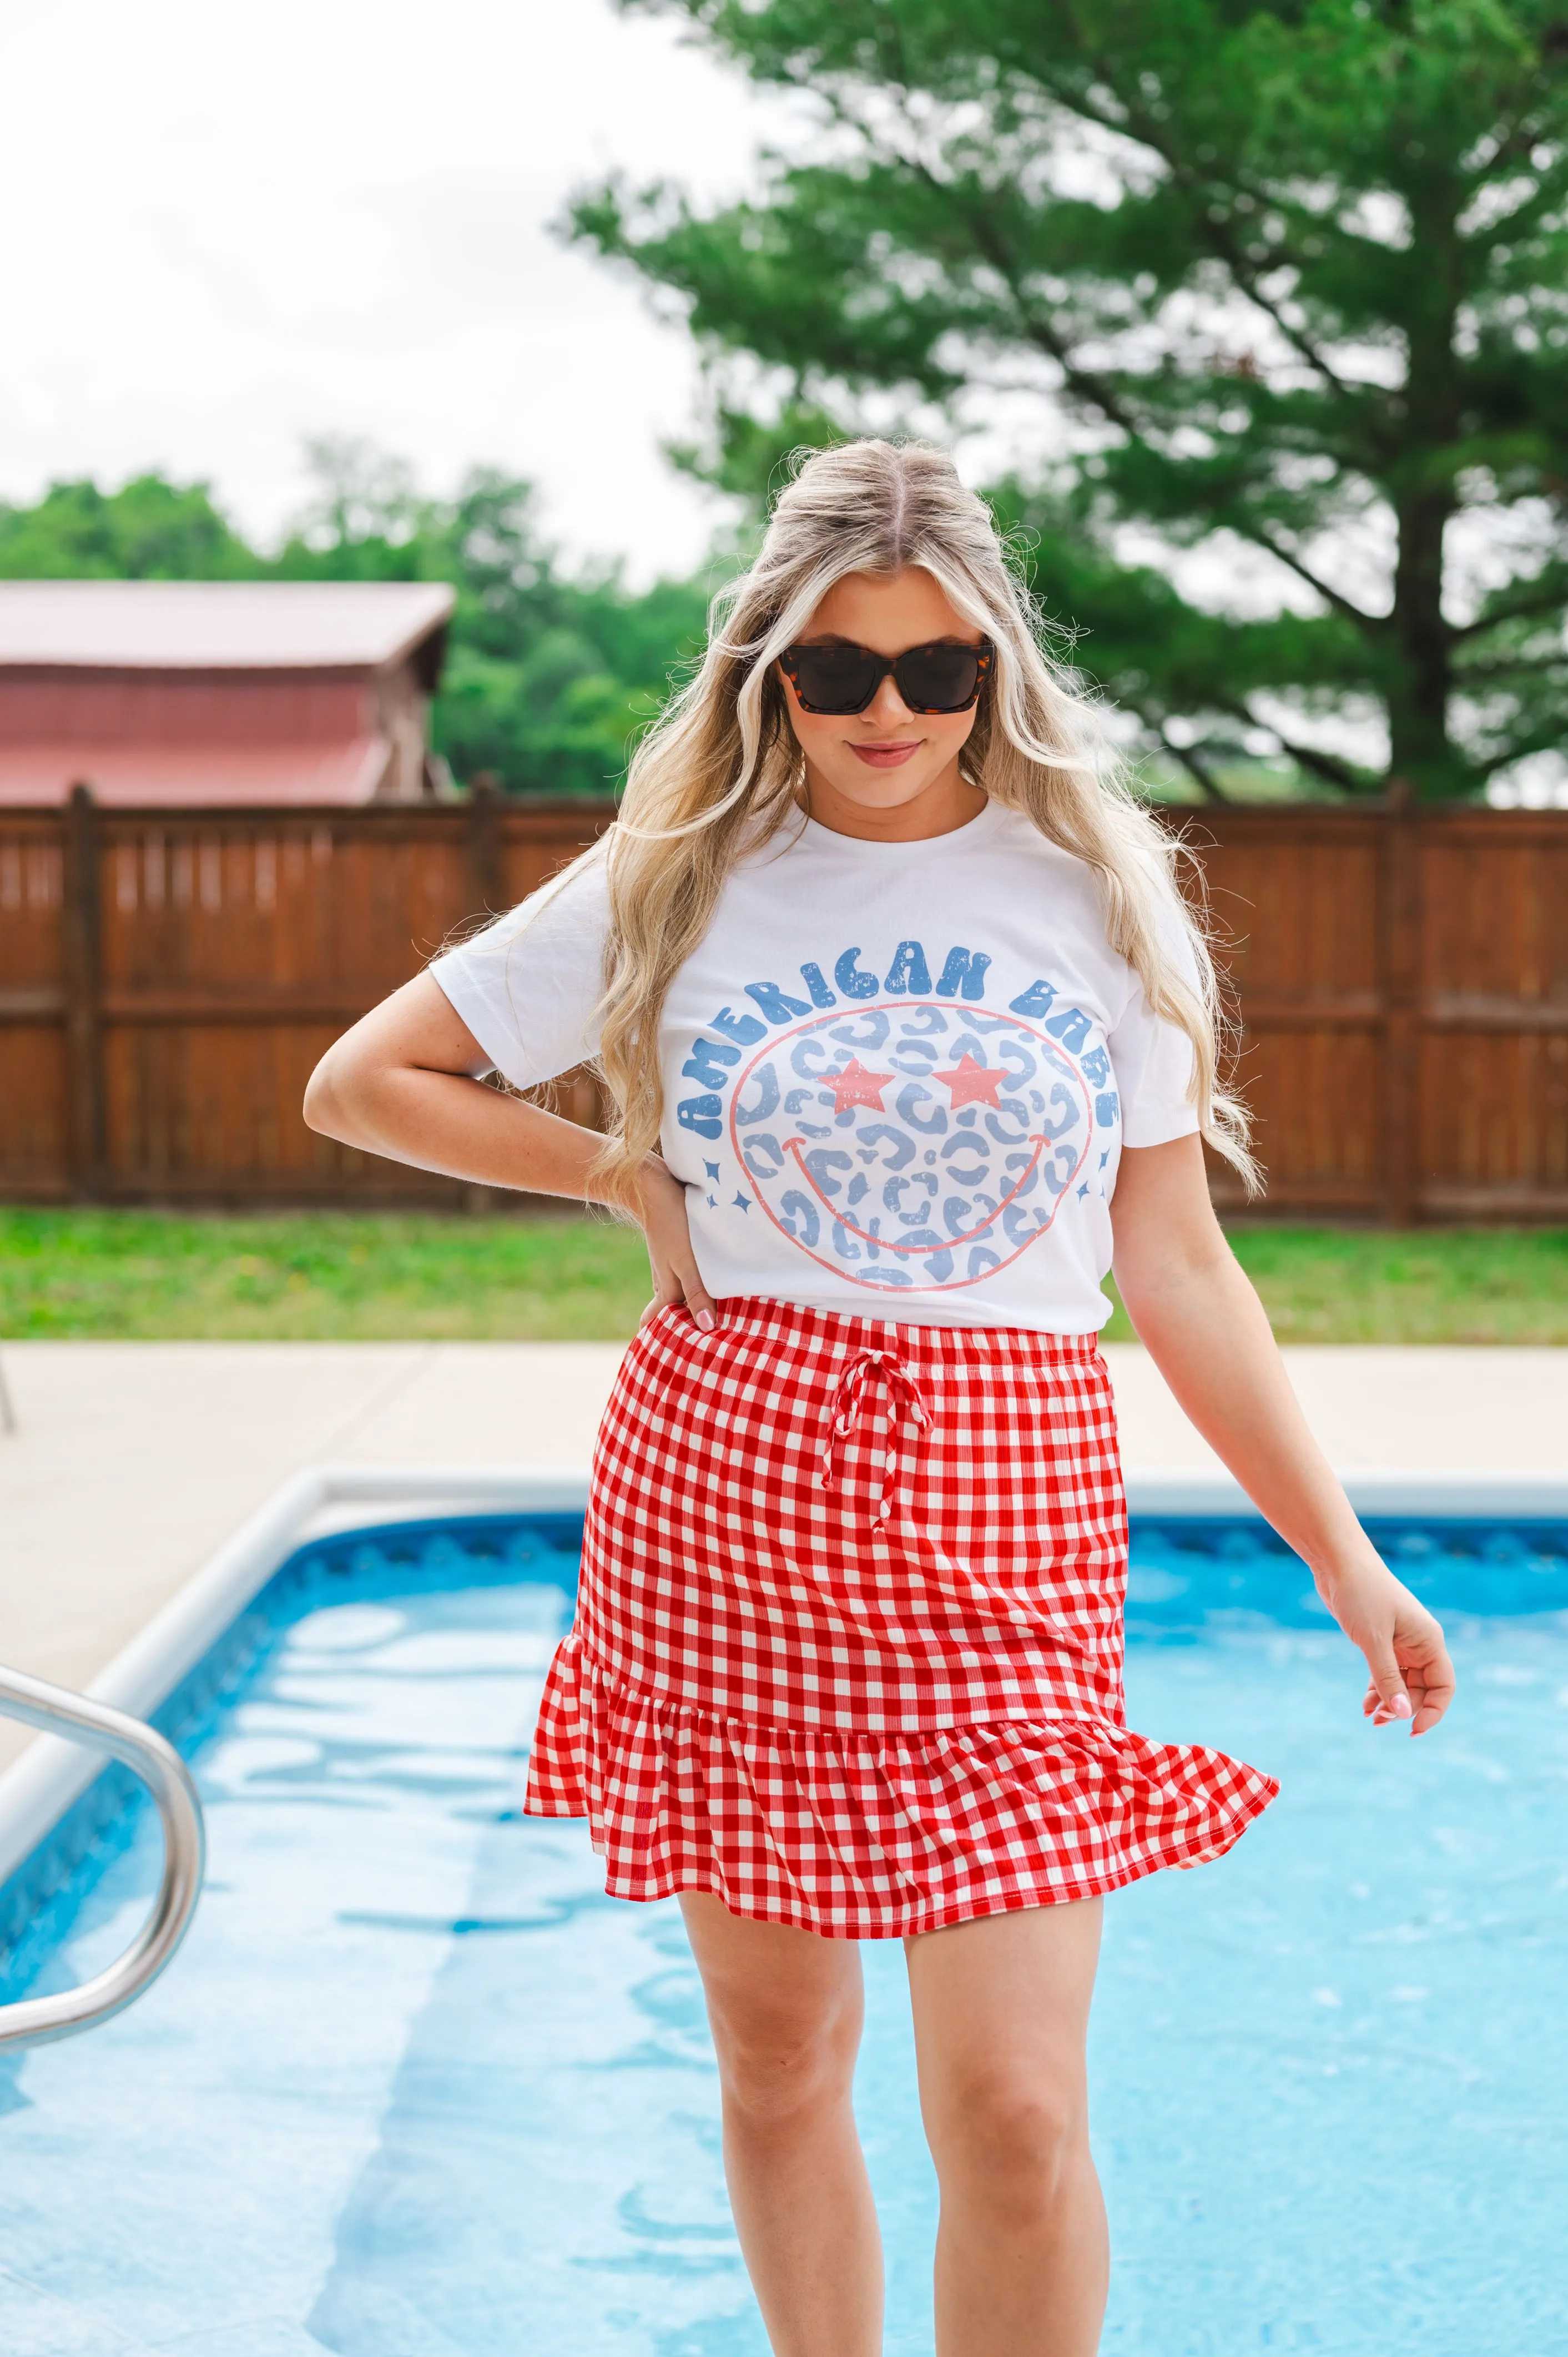 Woman in sunglasses posing by the pool wearing a white t-shirt with 'American Babe' print and red checked skirt.